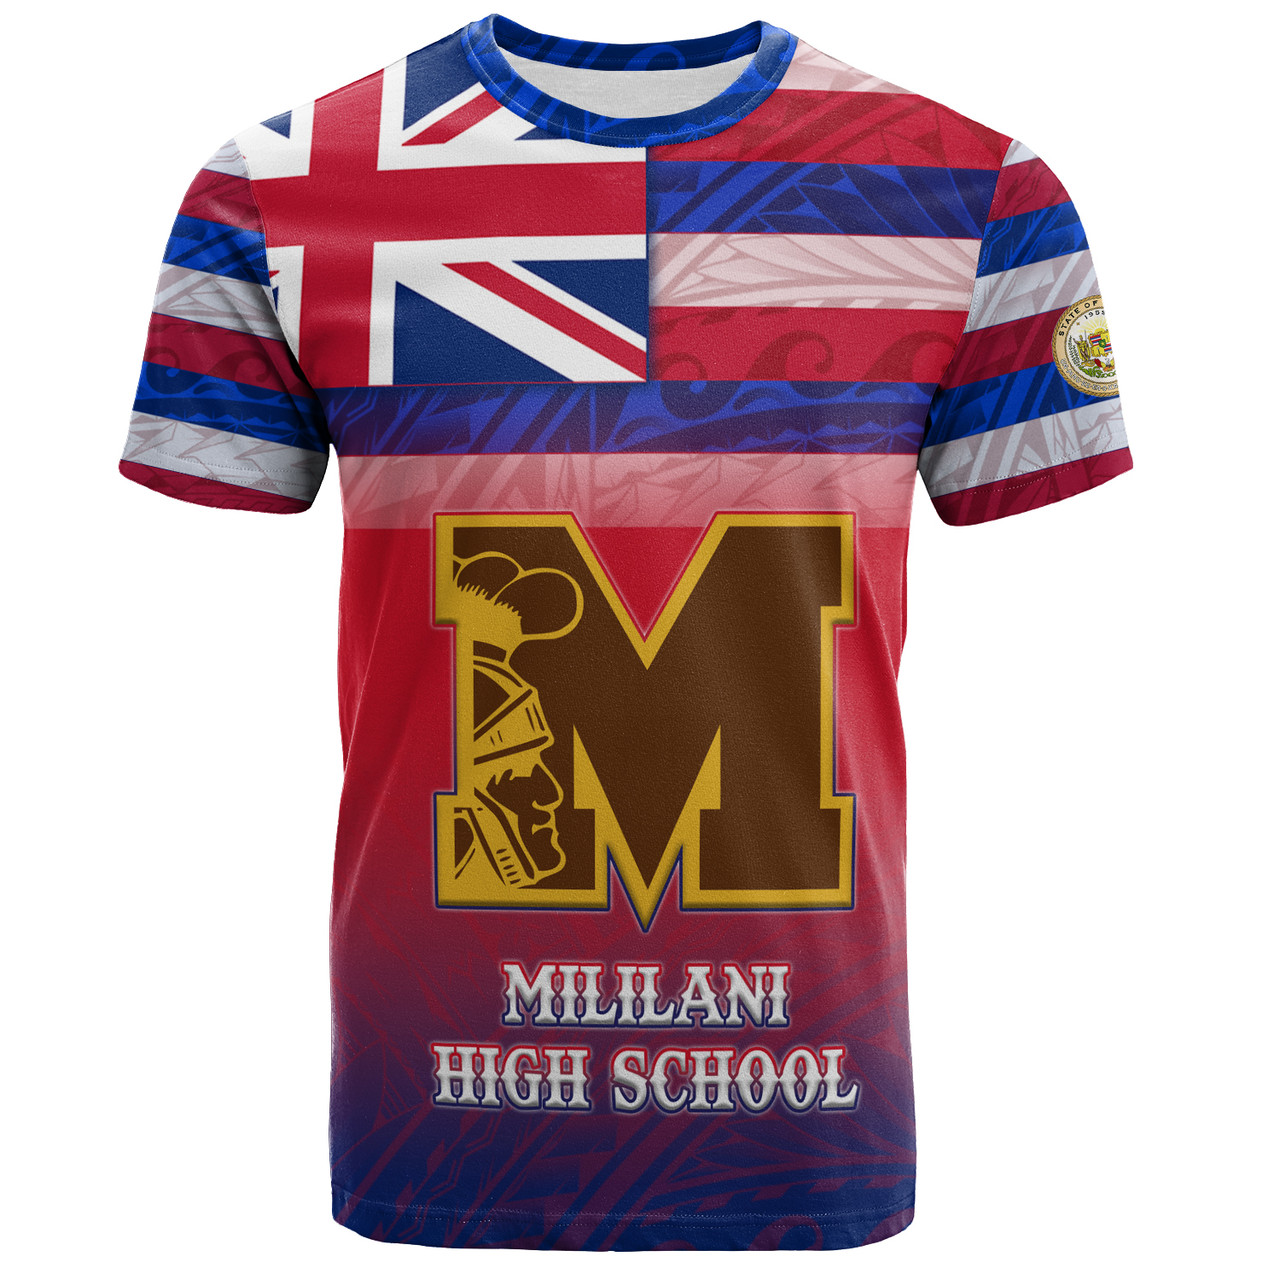 Hawaii Mililani High School T-Shirt Flag Color With Traditional Patterns